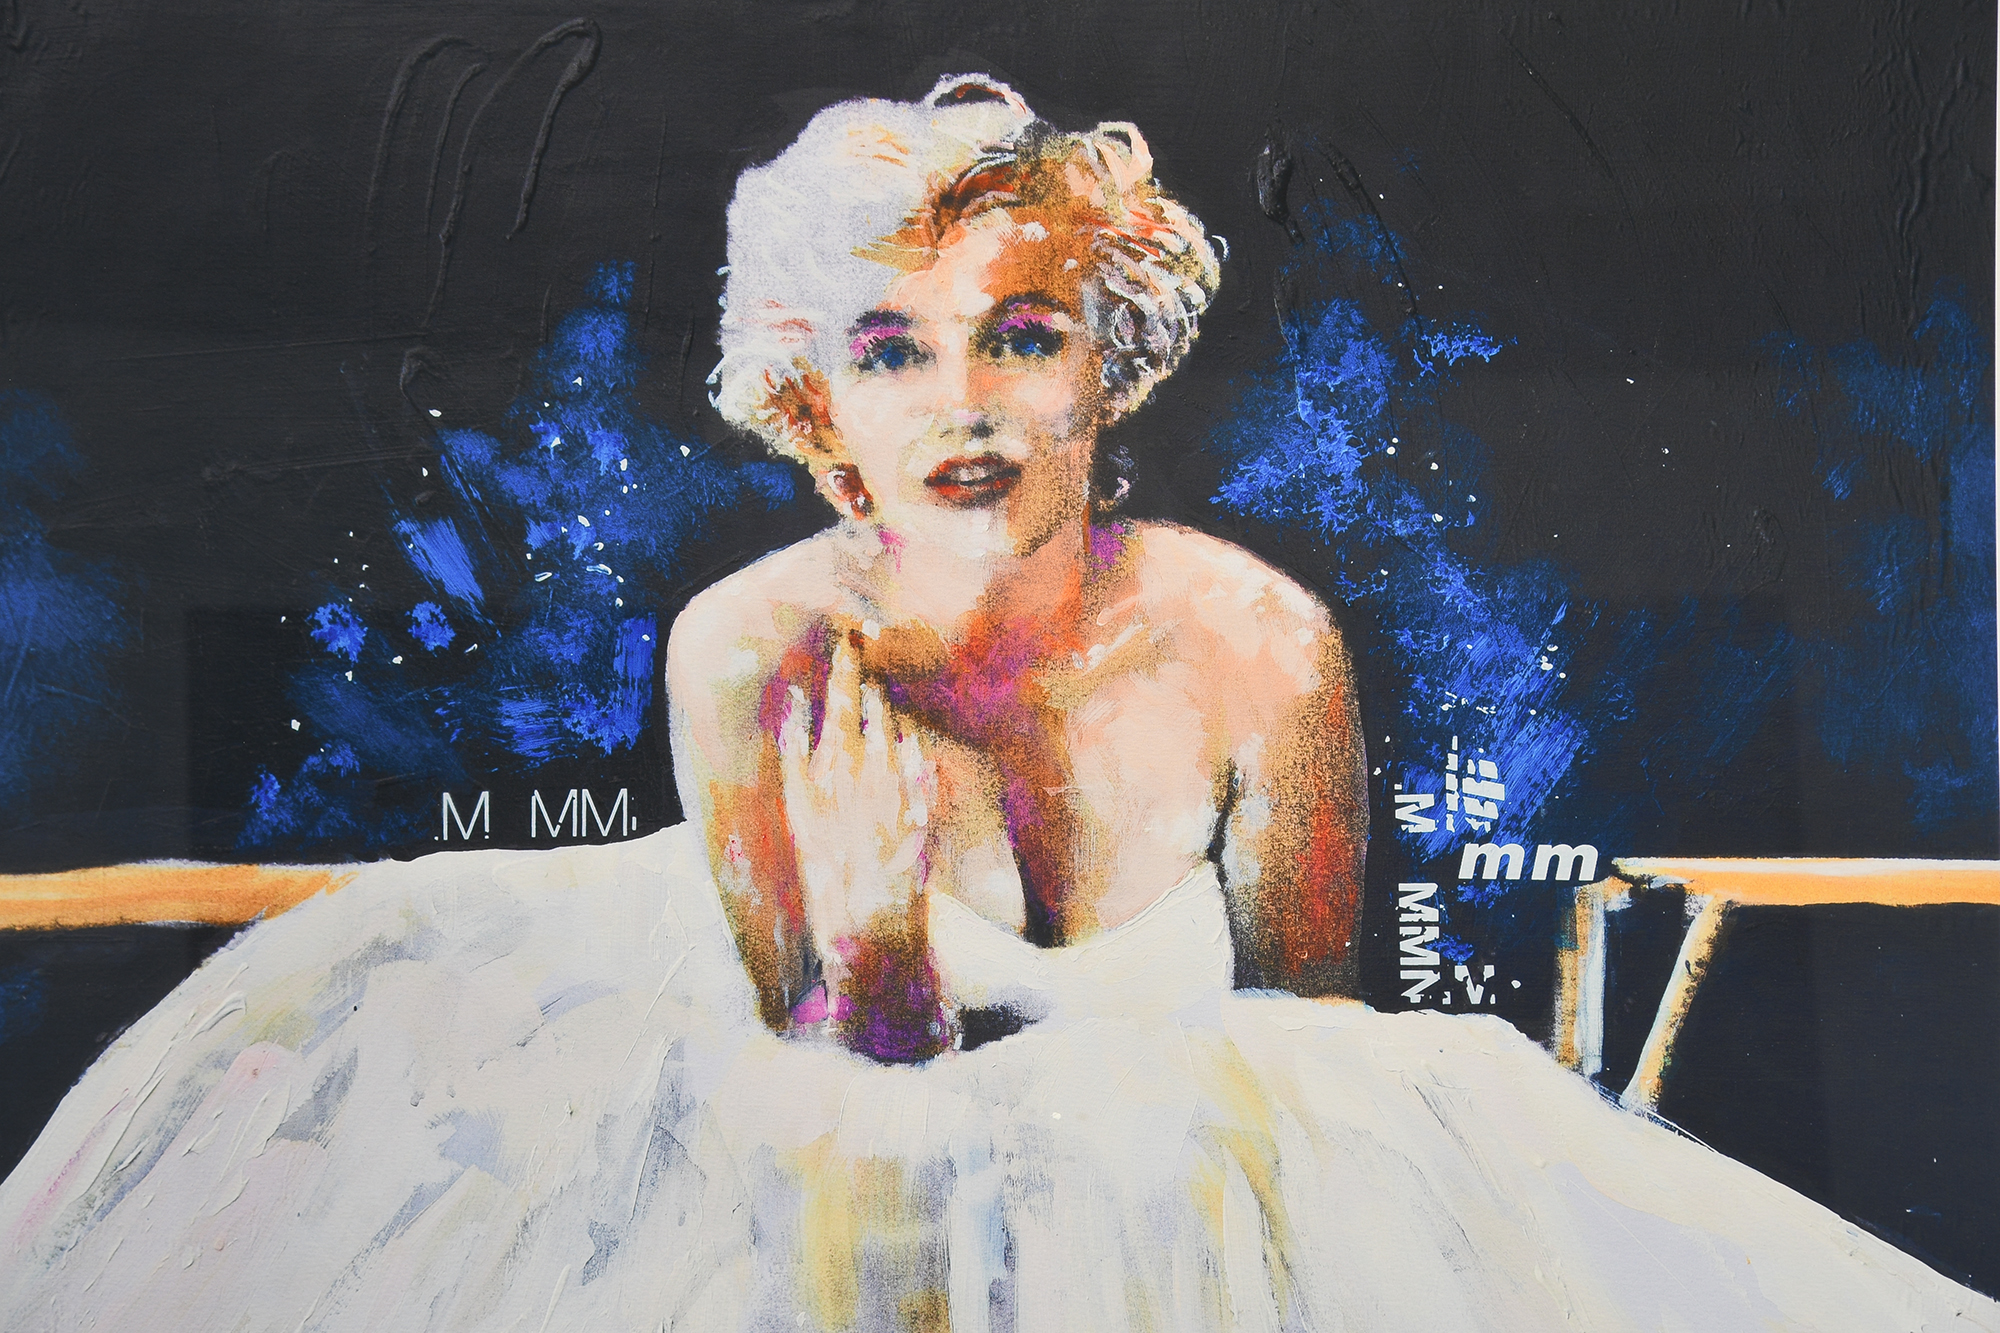 Stunning Framed Limited Edition by Sidney Maurer "Iconic Reflections" (Marilyn Monroe) - Image 2 of 2